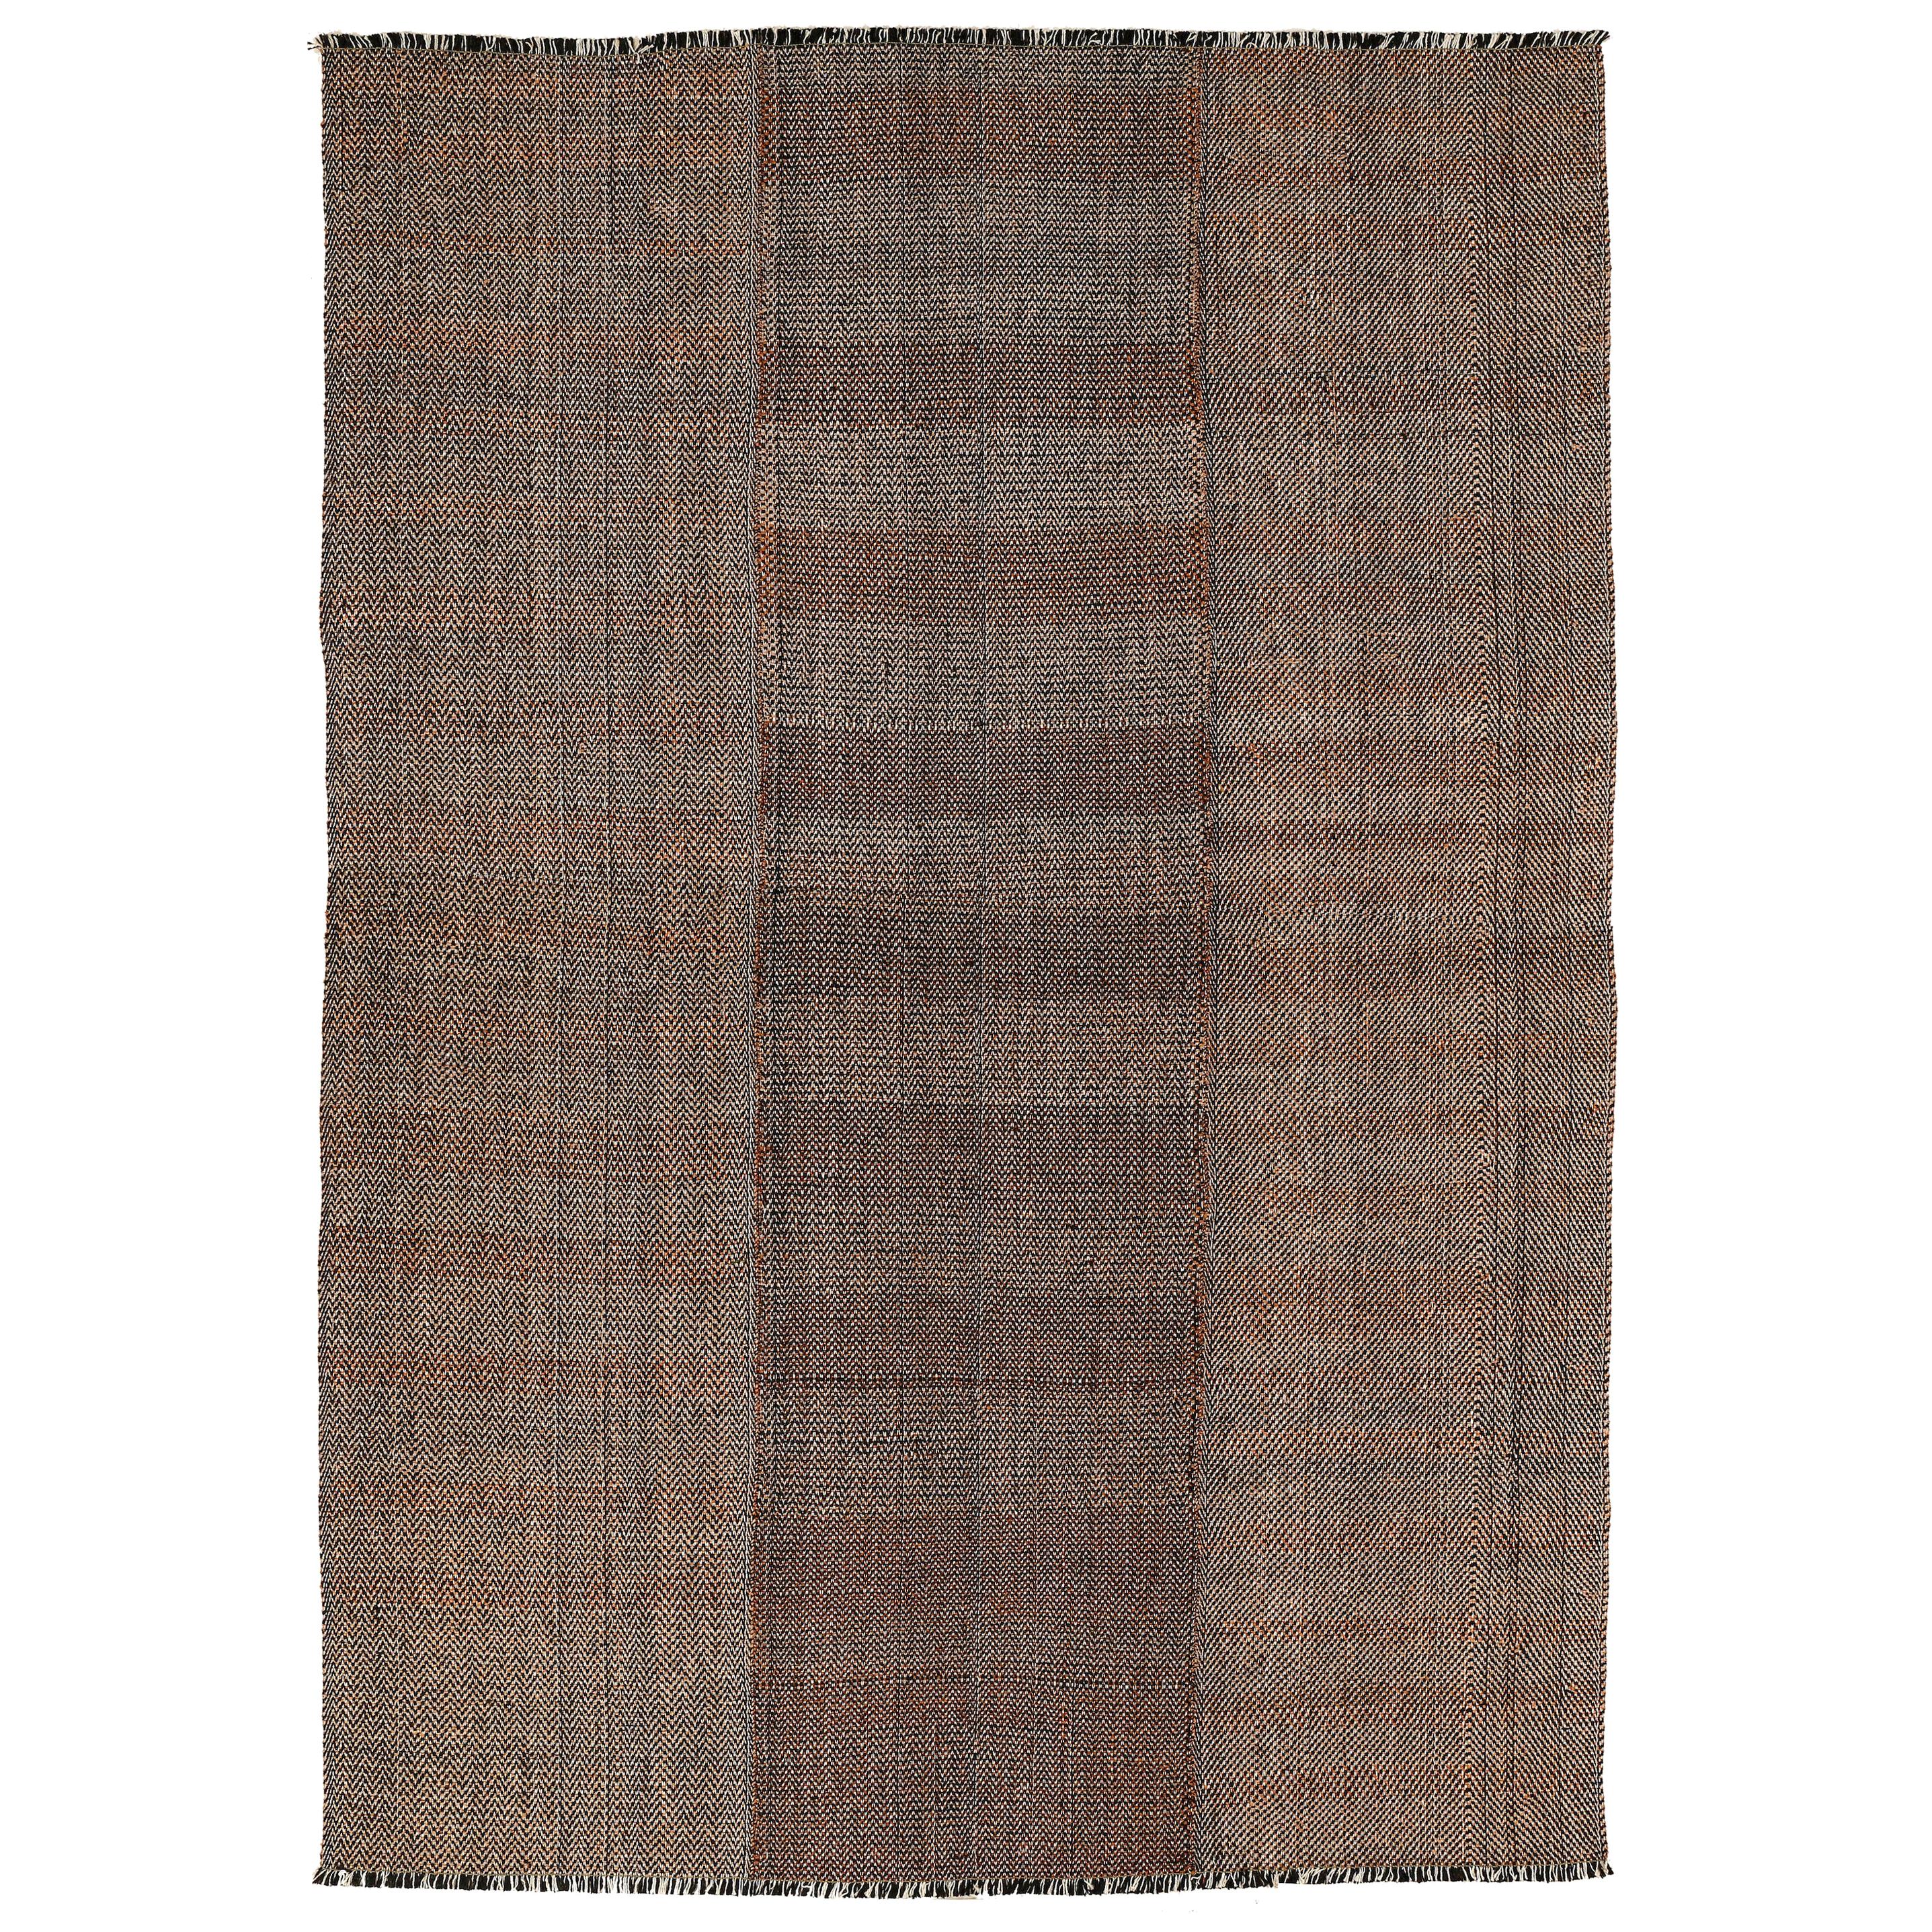 Outstanding Contemporary Oversized Geometric Kilim Rug